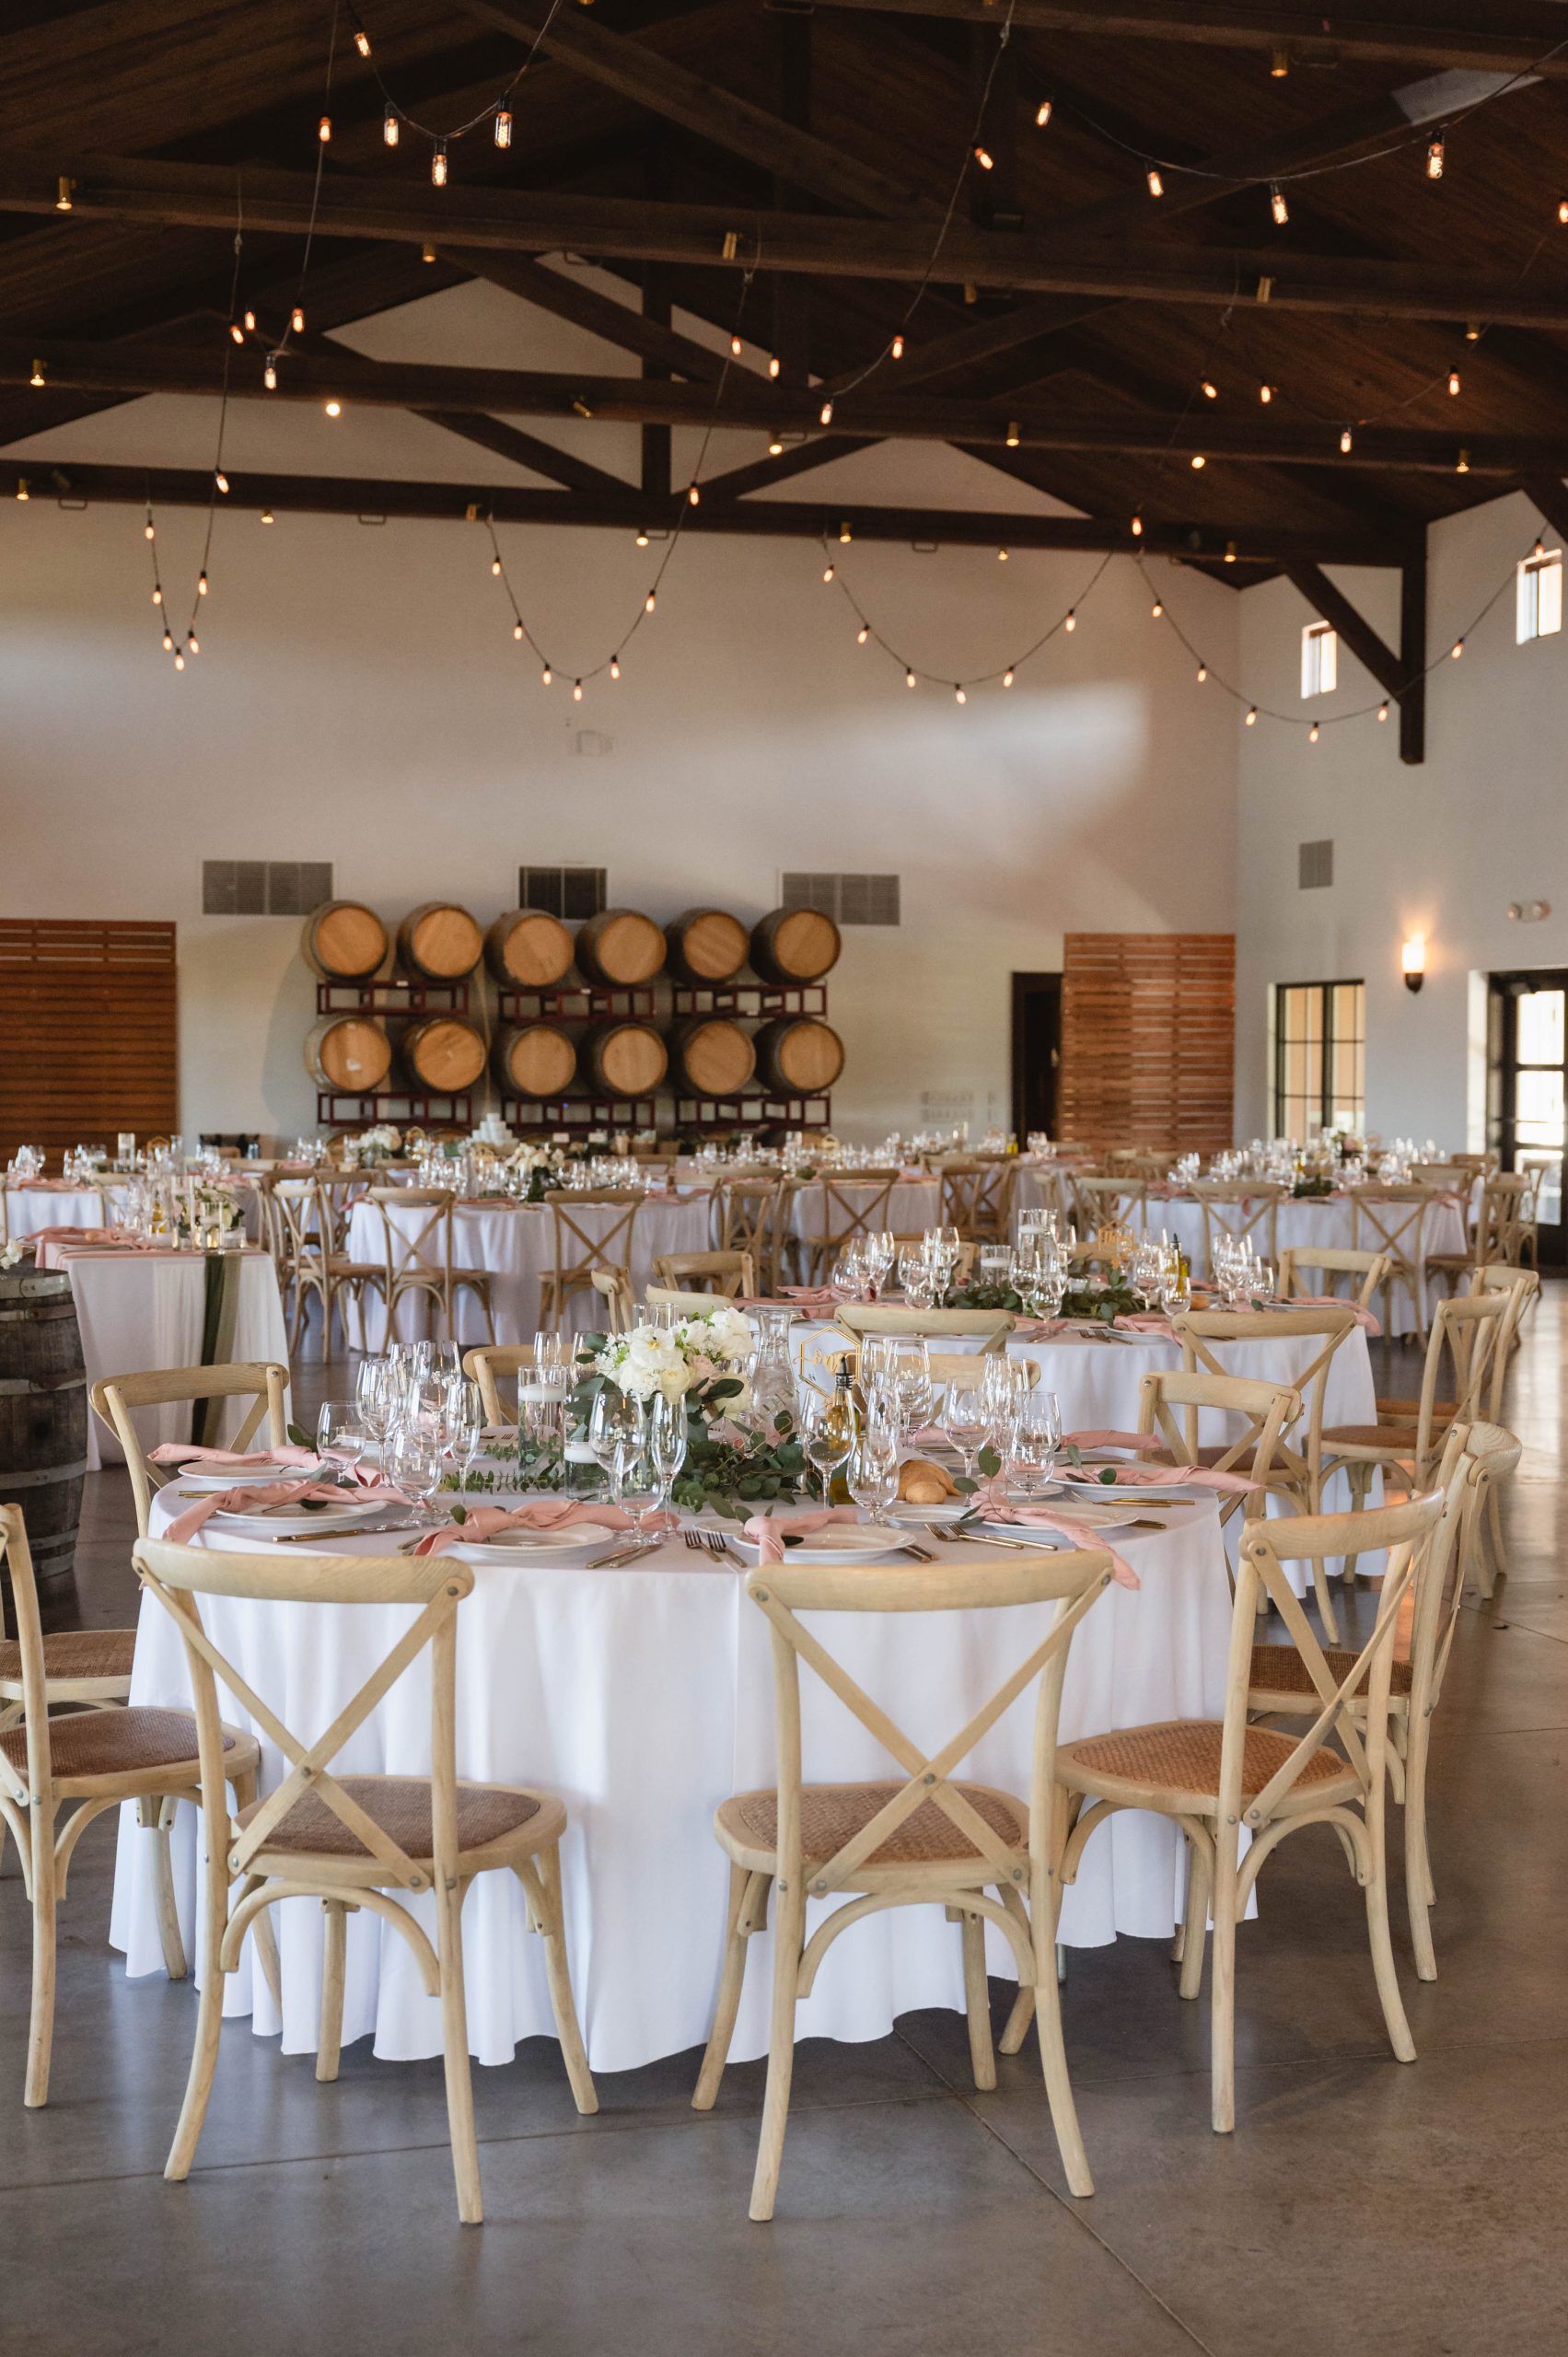 Reception Details from Soft Romantic + Minimalistic Wedding at Viansa Winery in Sonoma Jen Vazquez Photography